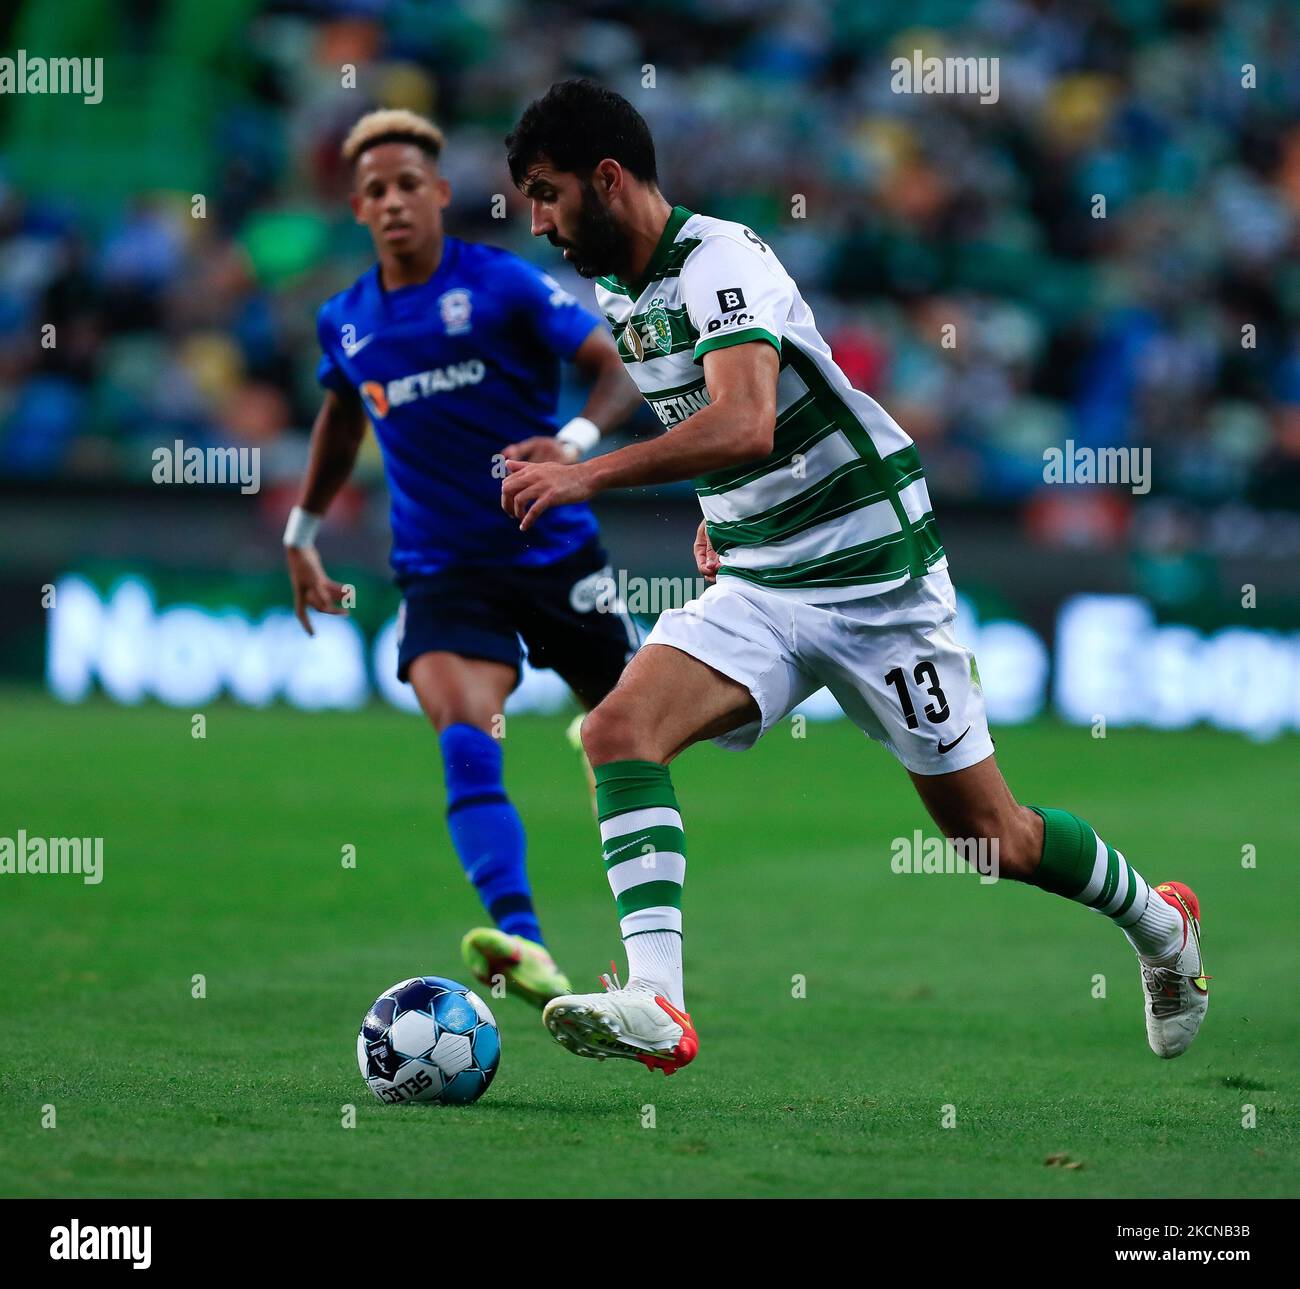 Luis Neto of Sporting CP in action during the Liga Portugal Bwin match between Sporting CP and CS Maritimo at Estadio Jose Alvalade on September 24, 2021 in Lisbon, Portugal. (Photo by Paulo Nascimento/NurPhoto) Stock Photo